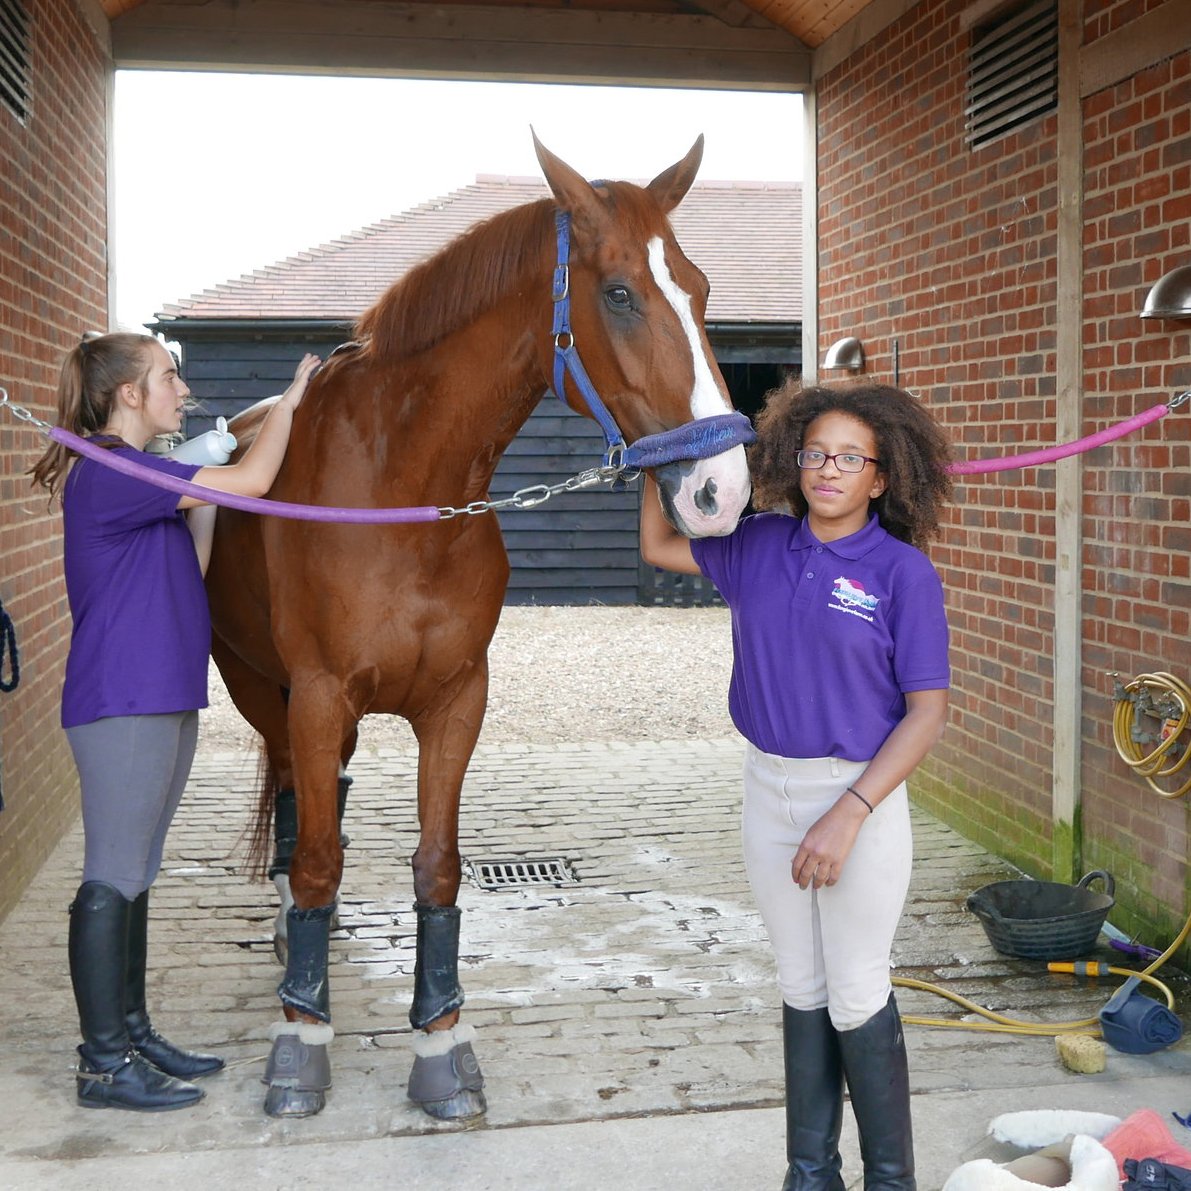 Two girls, one grooming a brown horse while the other is holding him looking at the camera and smiling, both wearing Foxglove Farm polo t-shirts in signature purple with logo designed by Yeswaydesign